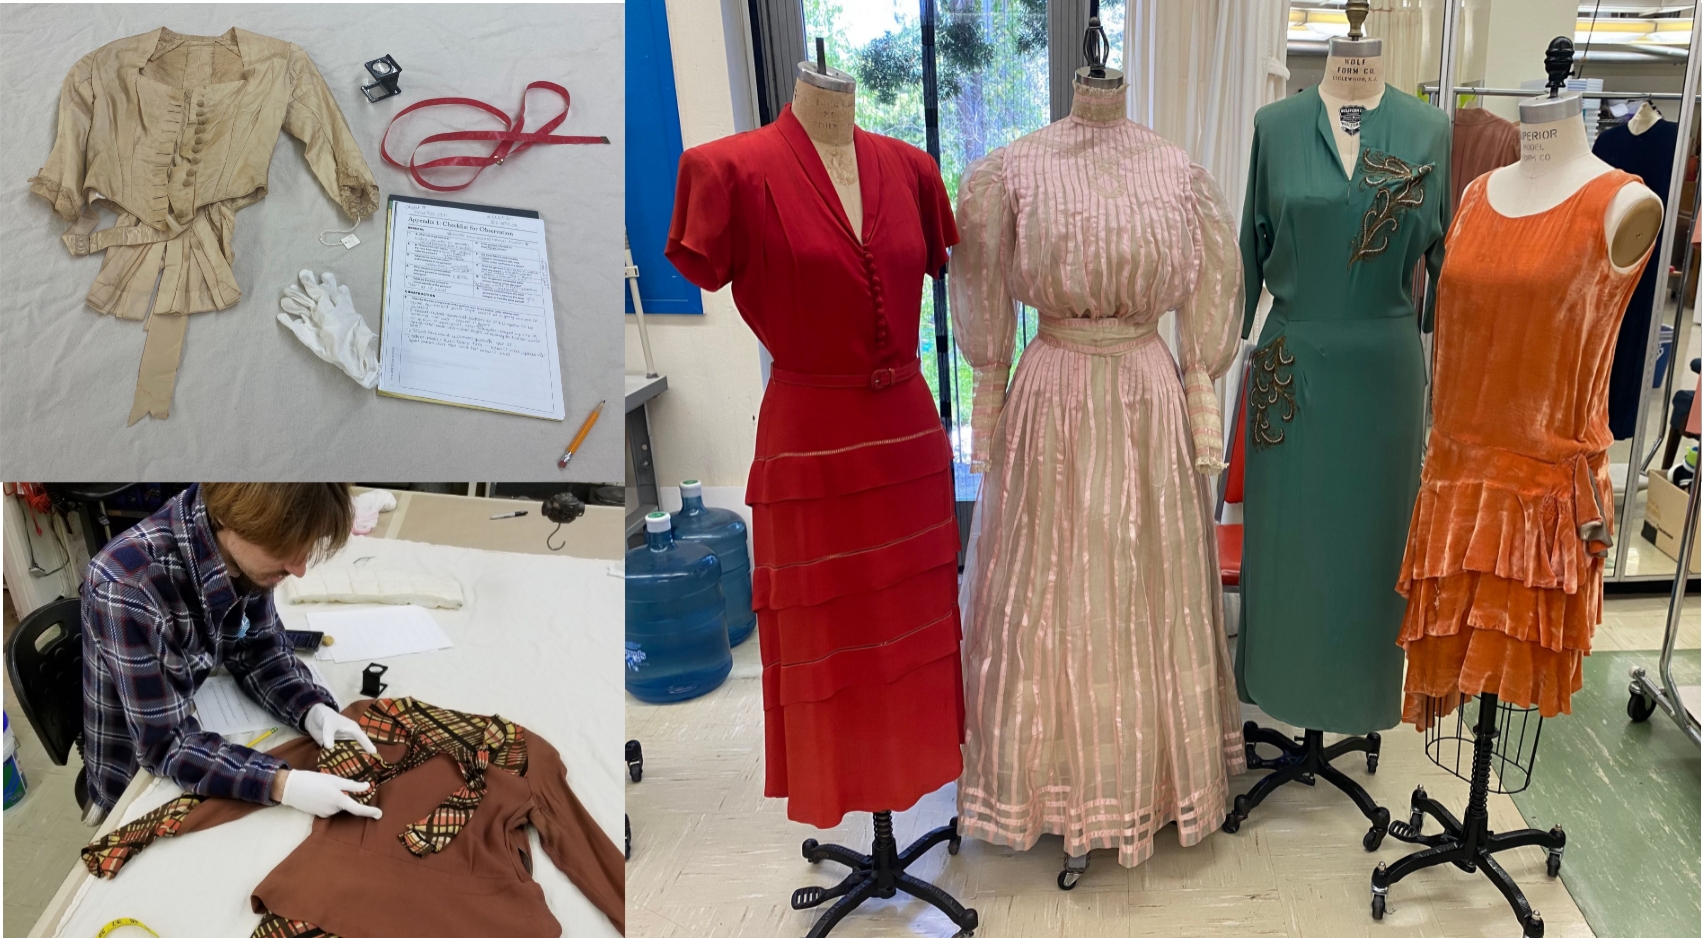 Pieces from the Alicia Annas Historic Costume Collection housed in the SDSU School of Theatre, Television, and Film.